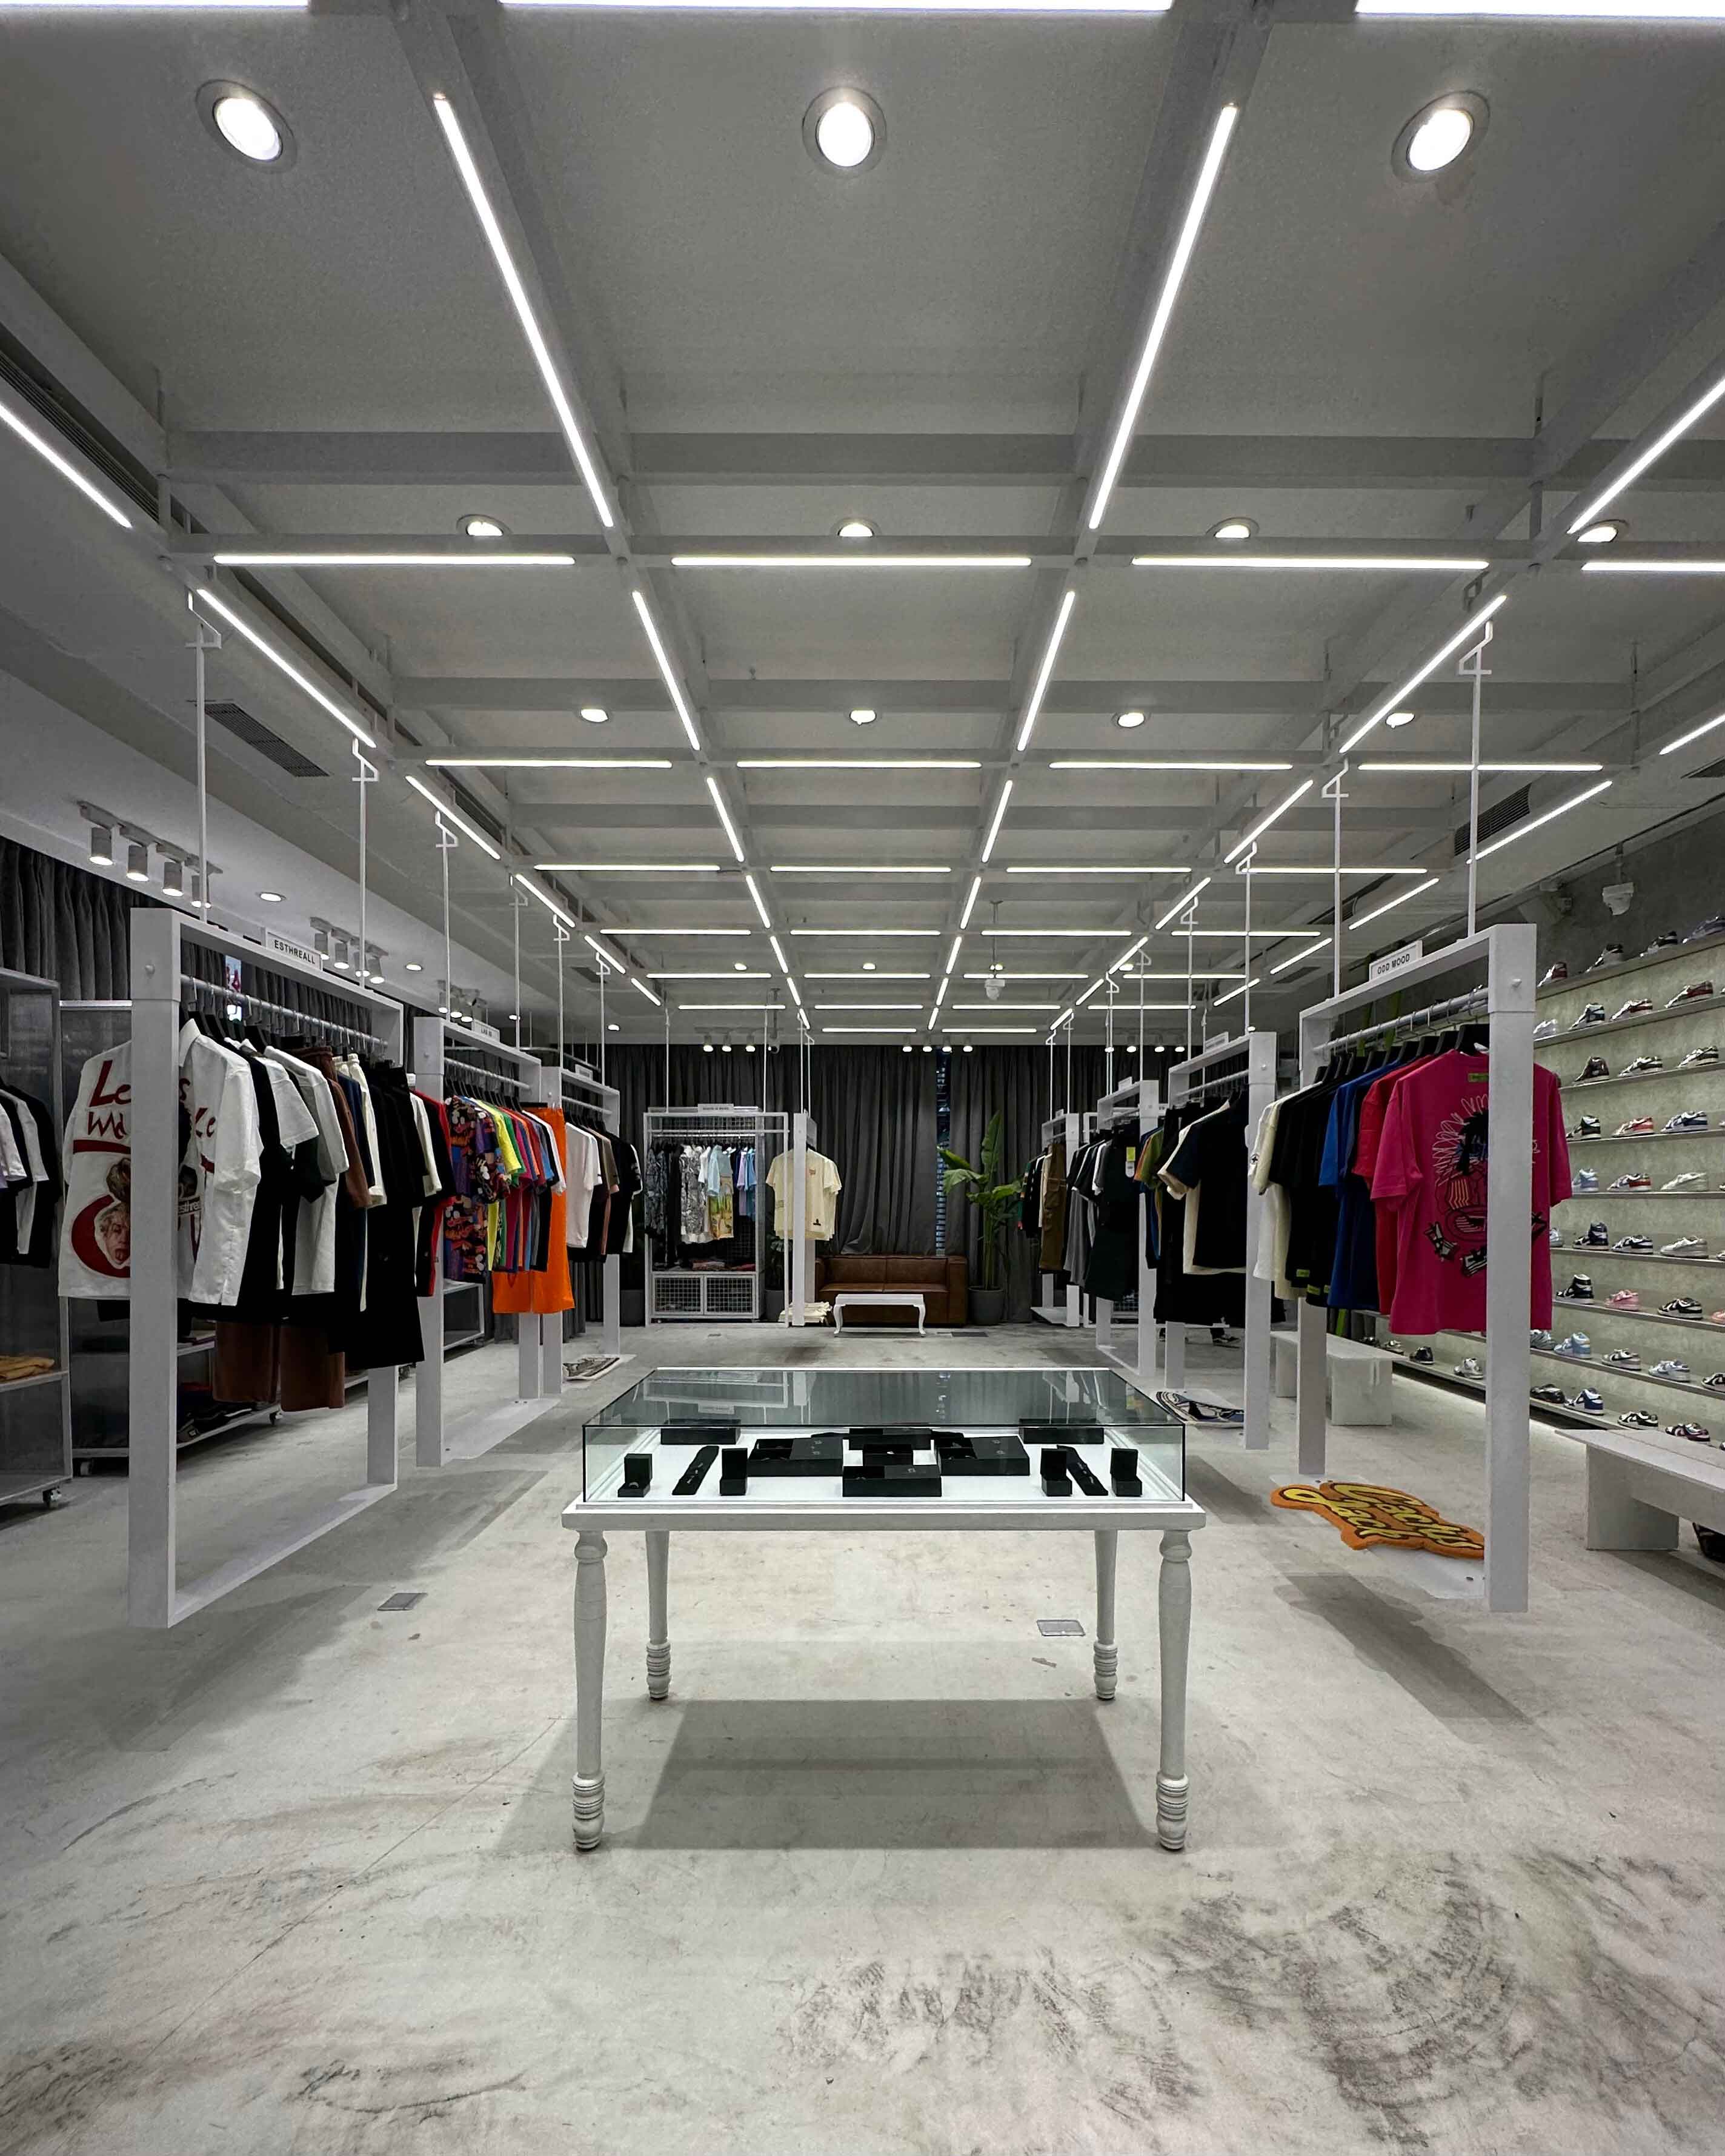 Hypebeast to open a New York flagship store - Inside Retail Asia